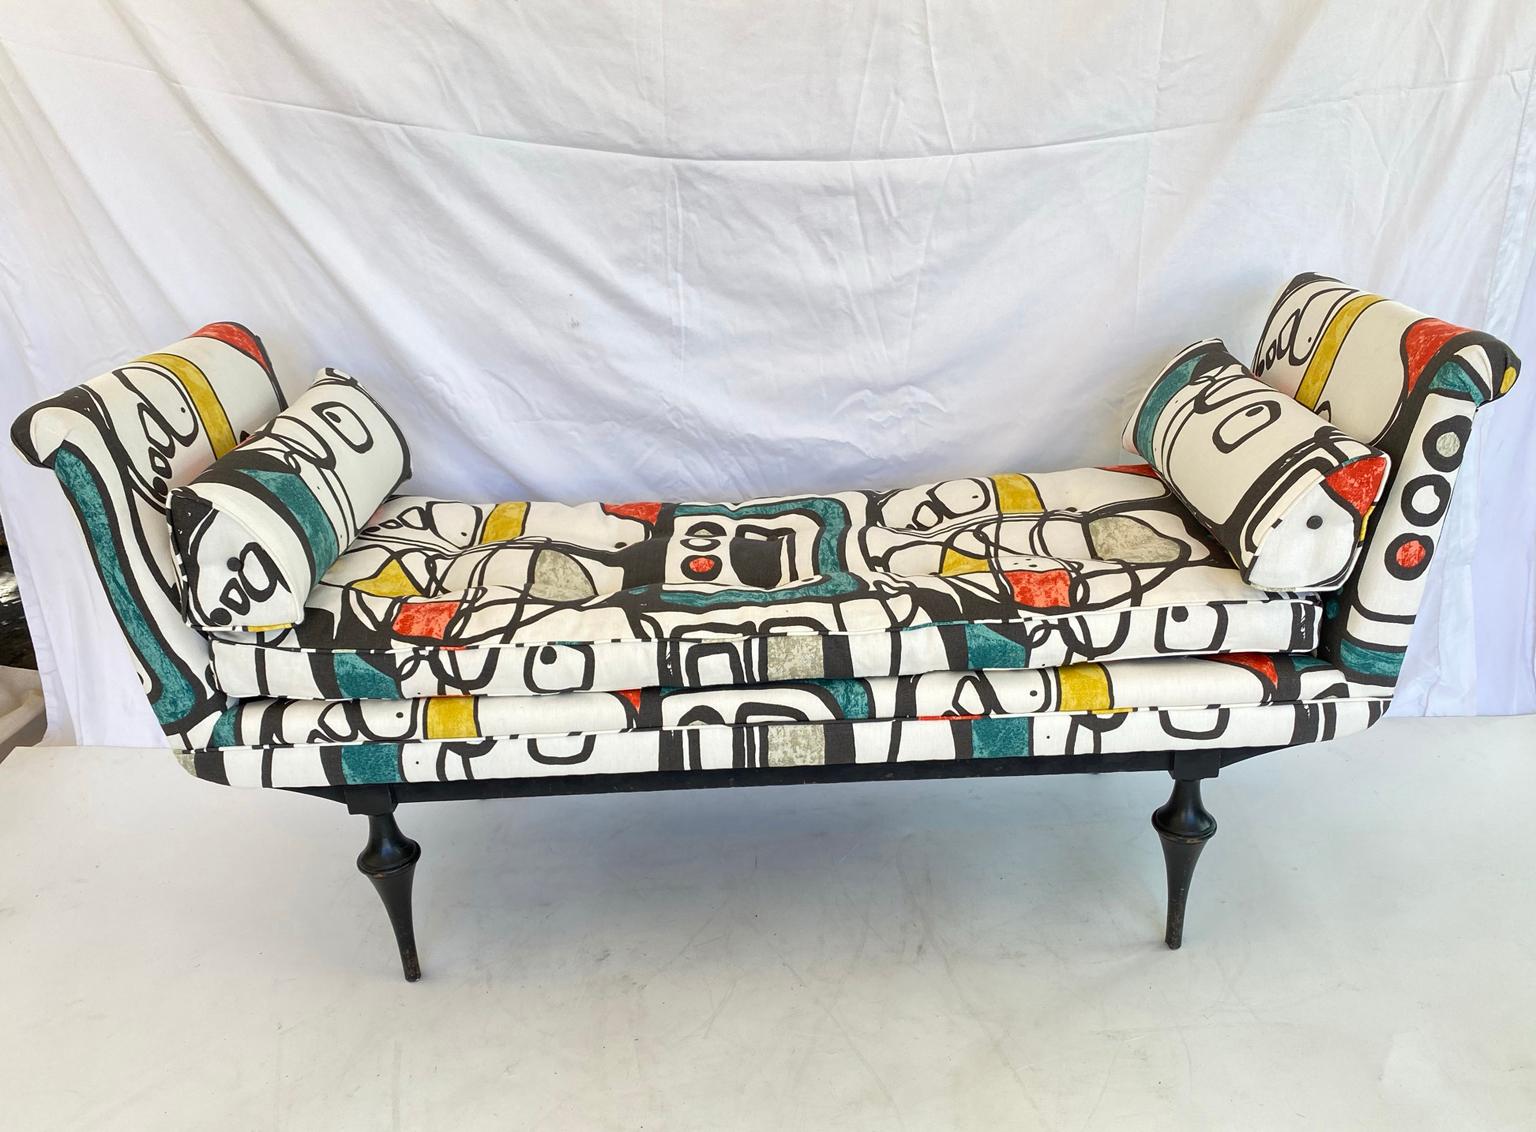 Daybed style settee, upholstered in Joan Miró inspired fabric, having a long, button-tufted, drop-in center cushion, flanked by padded, outscrolled arms, and triangular bolster pillows, on a black lacquer frame, raised on highly stylized, turned